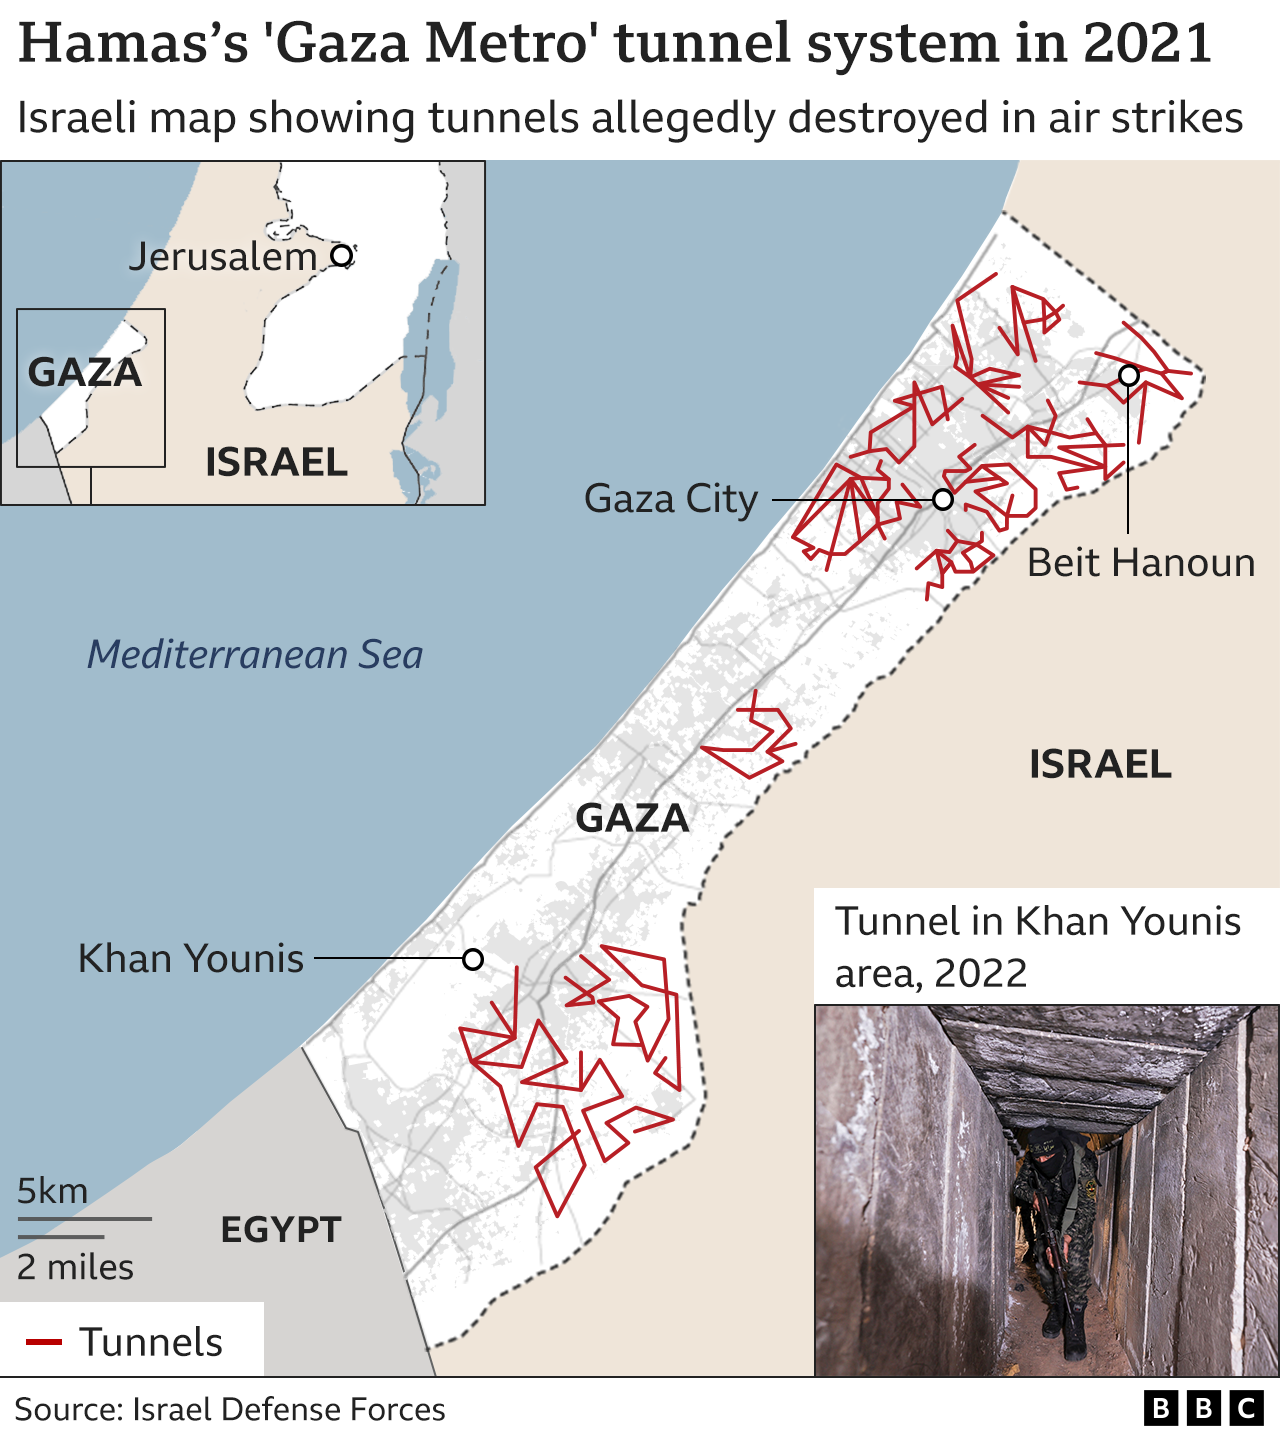 Graphic based on 2021 Israeli military map showing destroyed sections of Hamas's "Gaza Metro" tunnel system